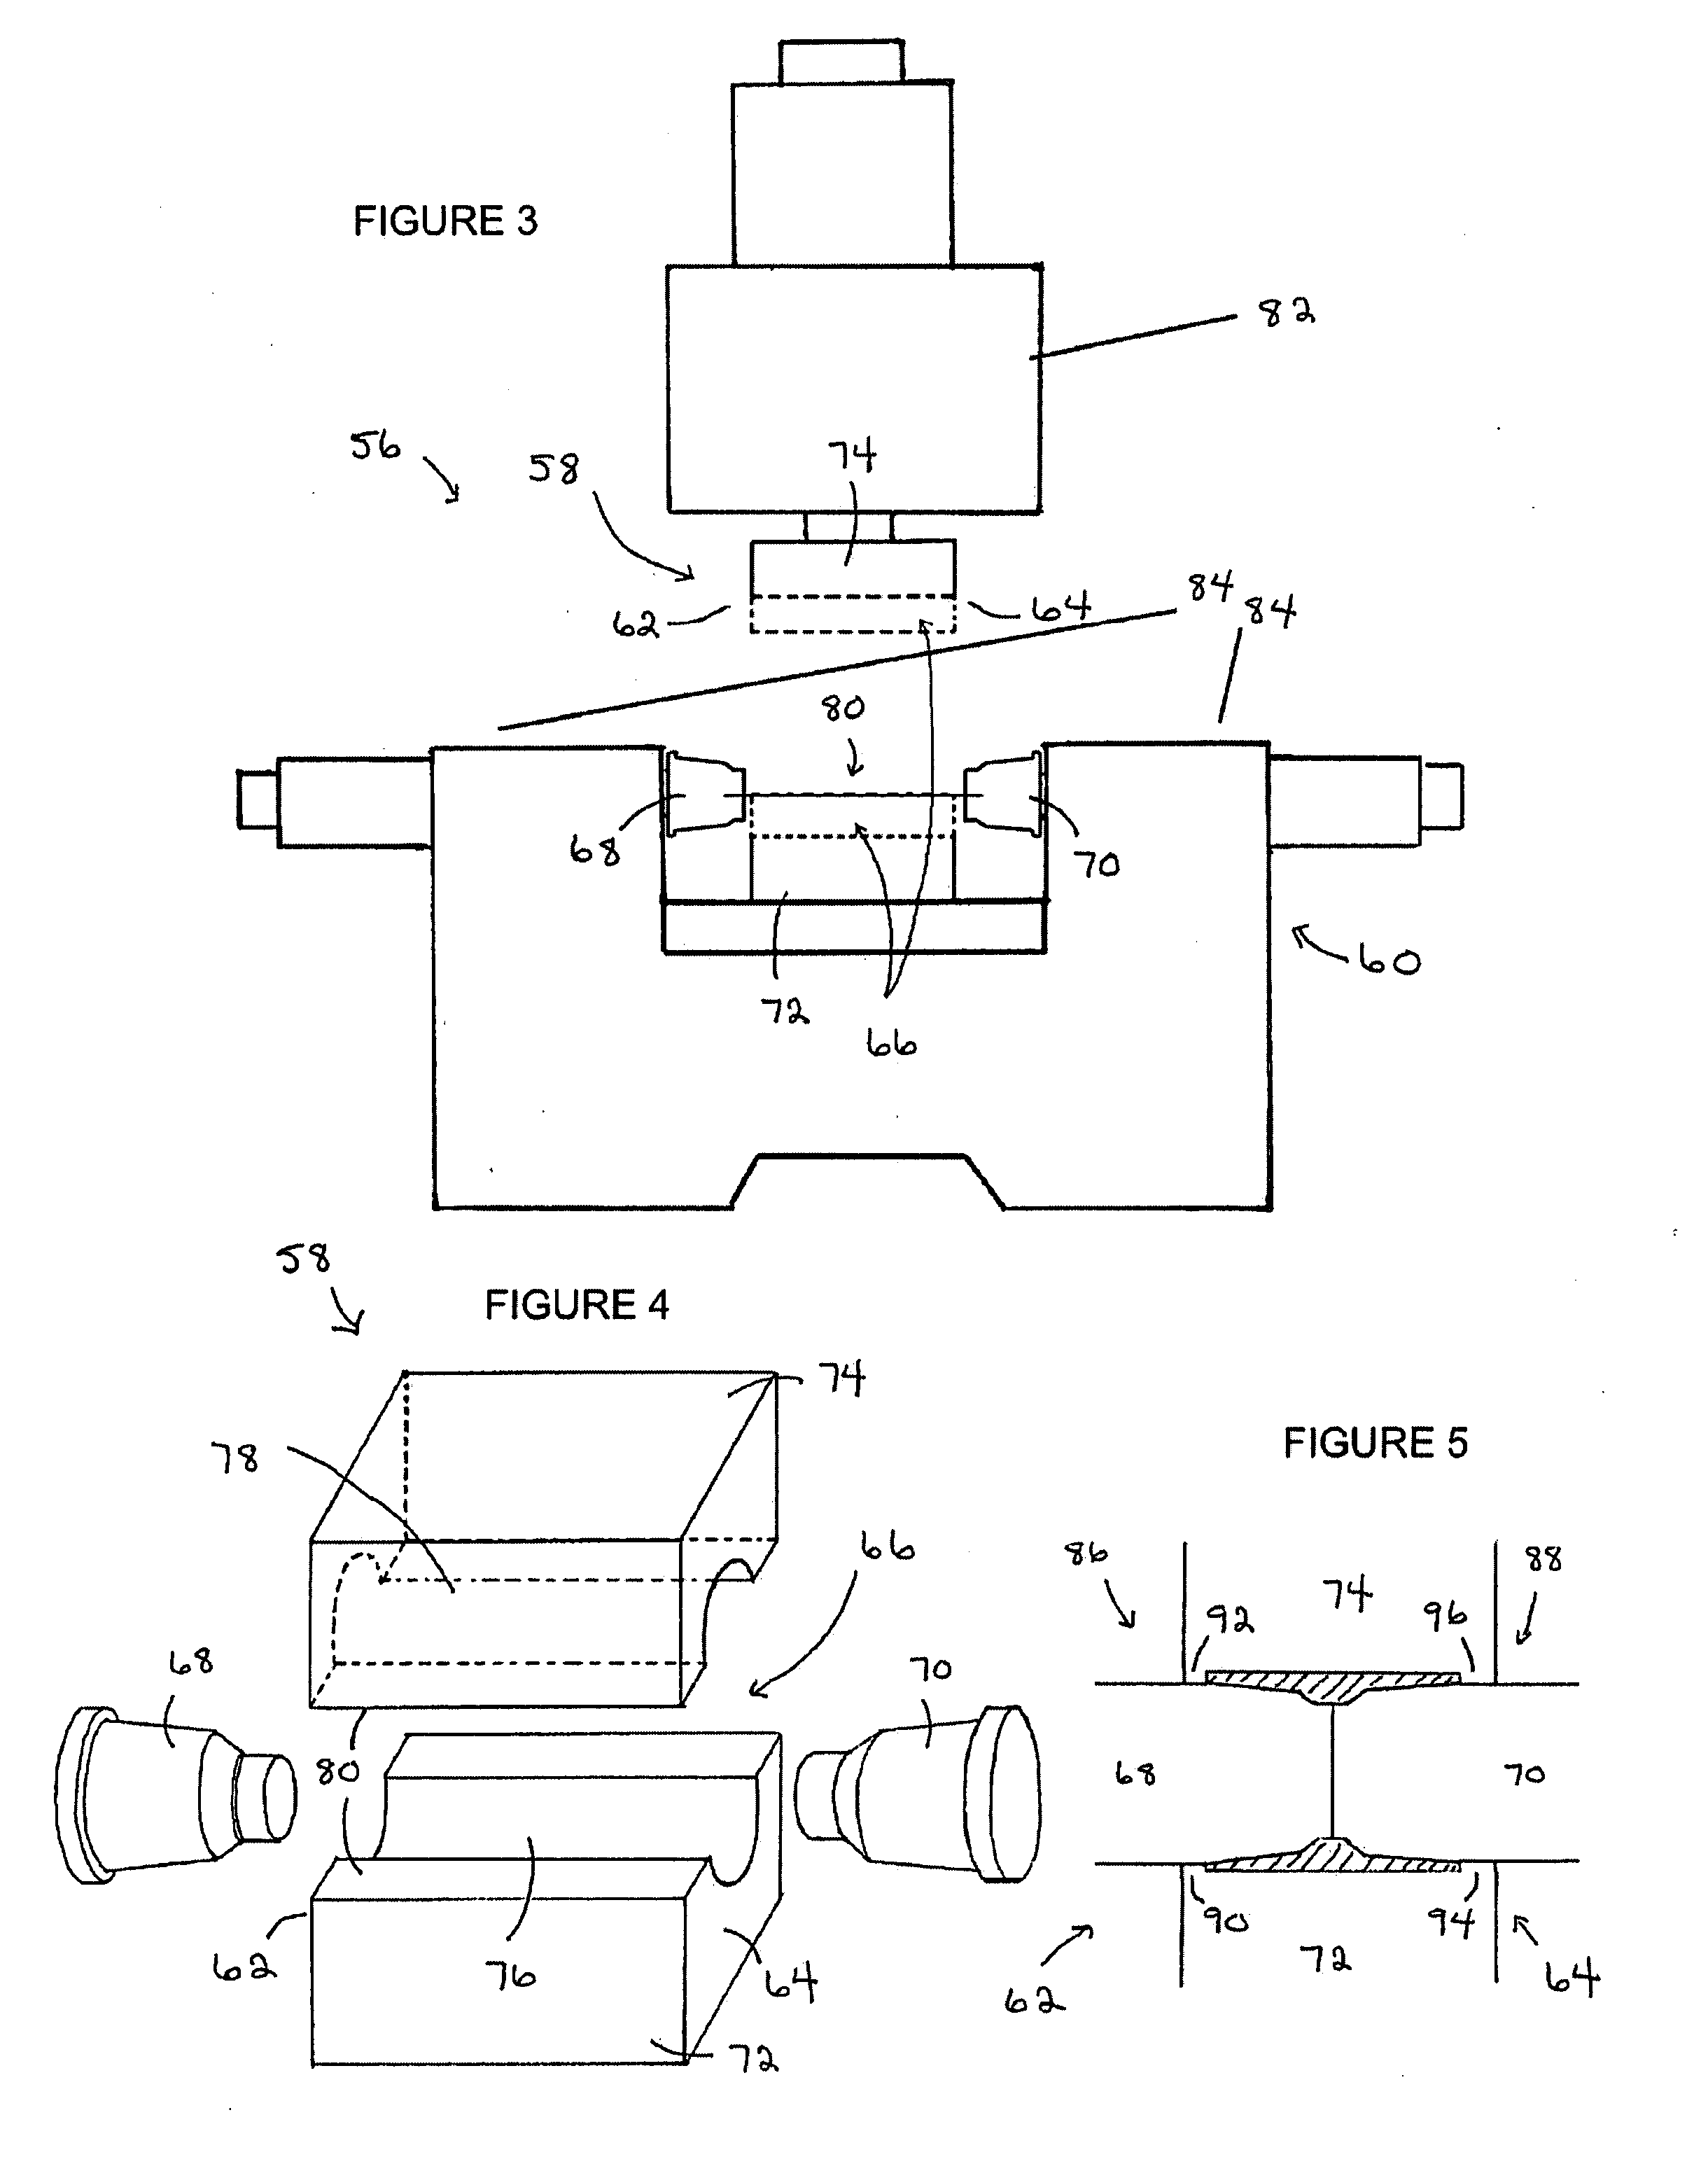 Apparatus and method for forging premium coupling blanks